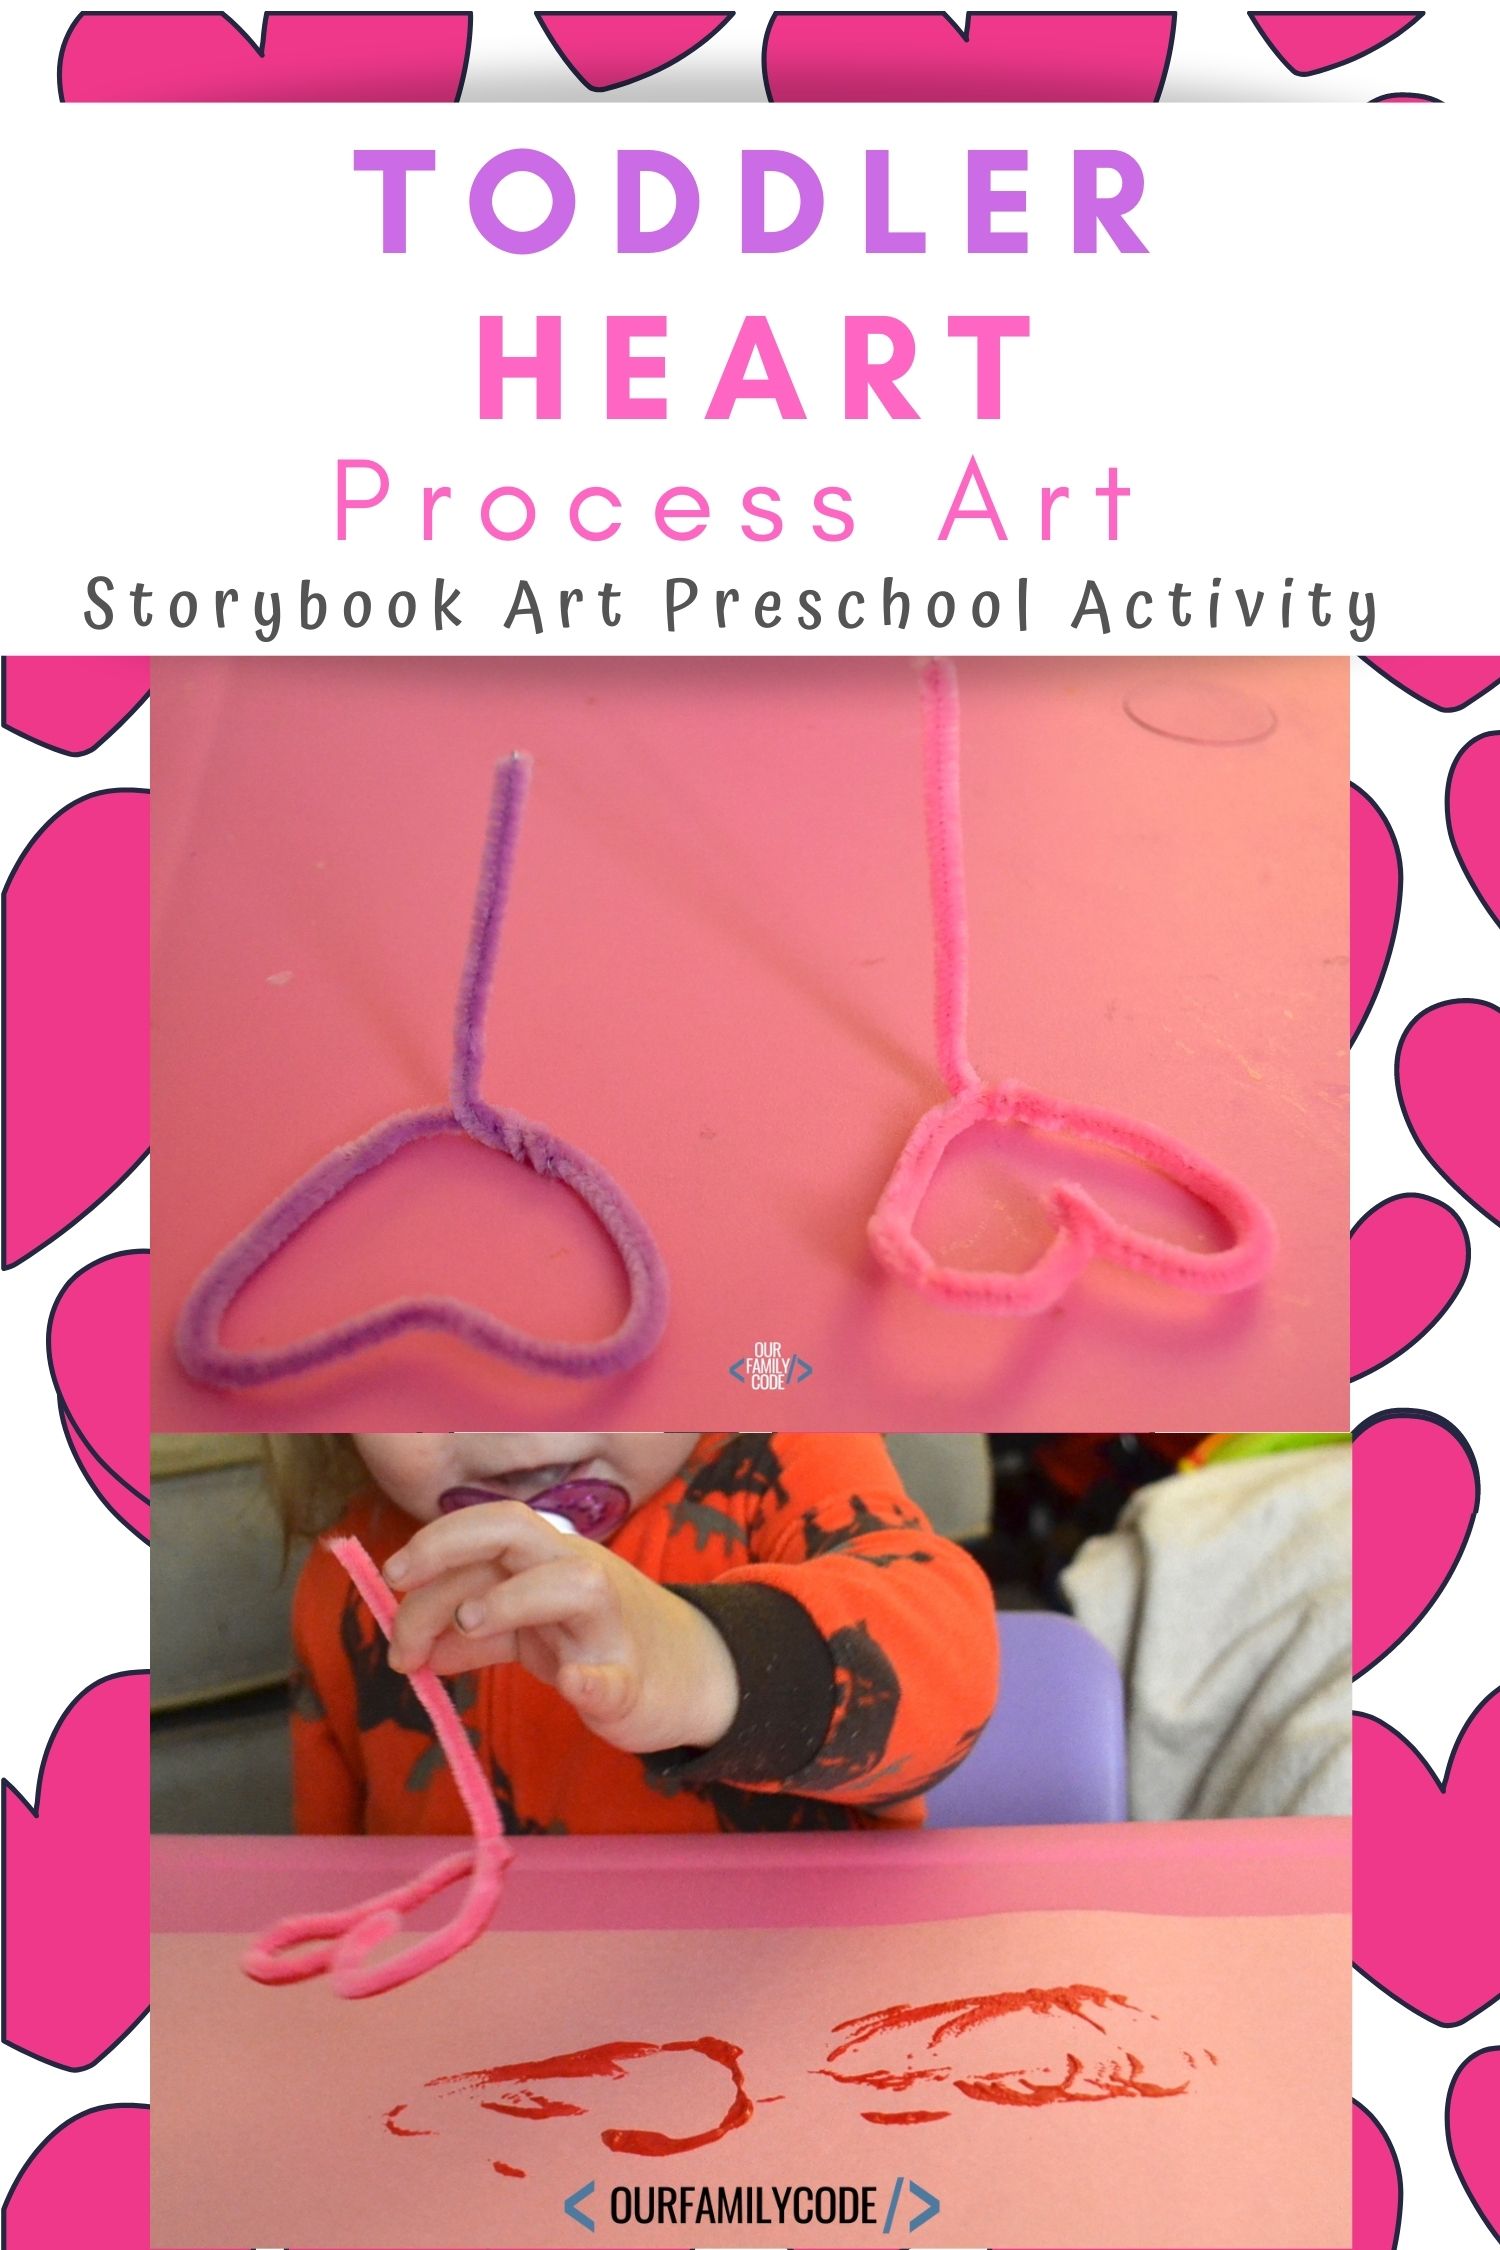 A picture of a pipe cleaner painting activity for toddlers.